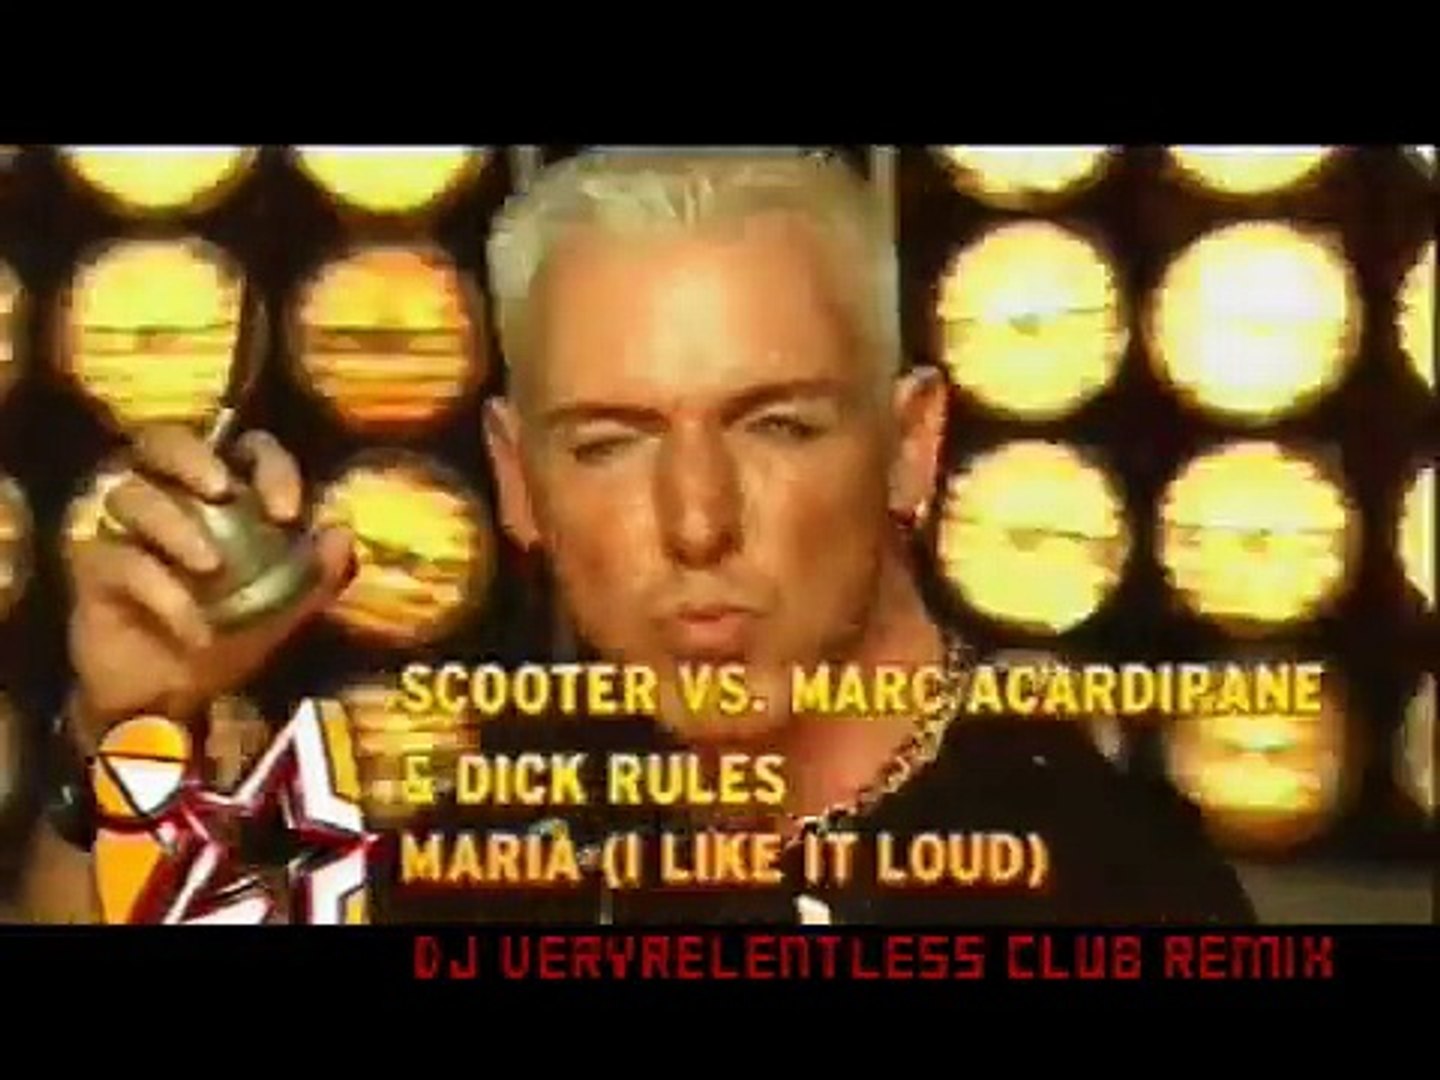 Scooter - Maria (I Like It Loud)(Club Remix) - video Dailymotion